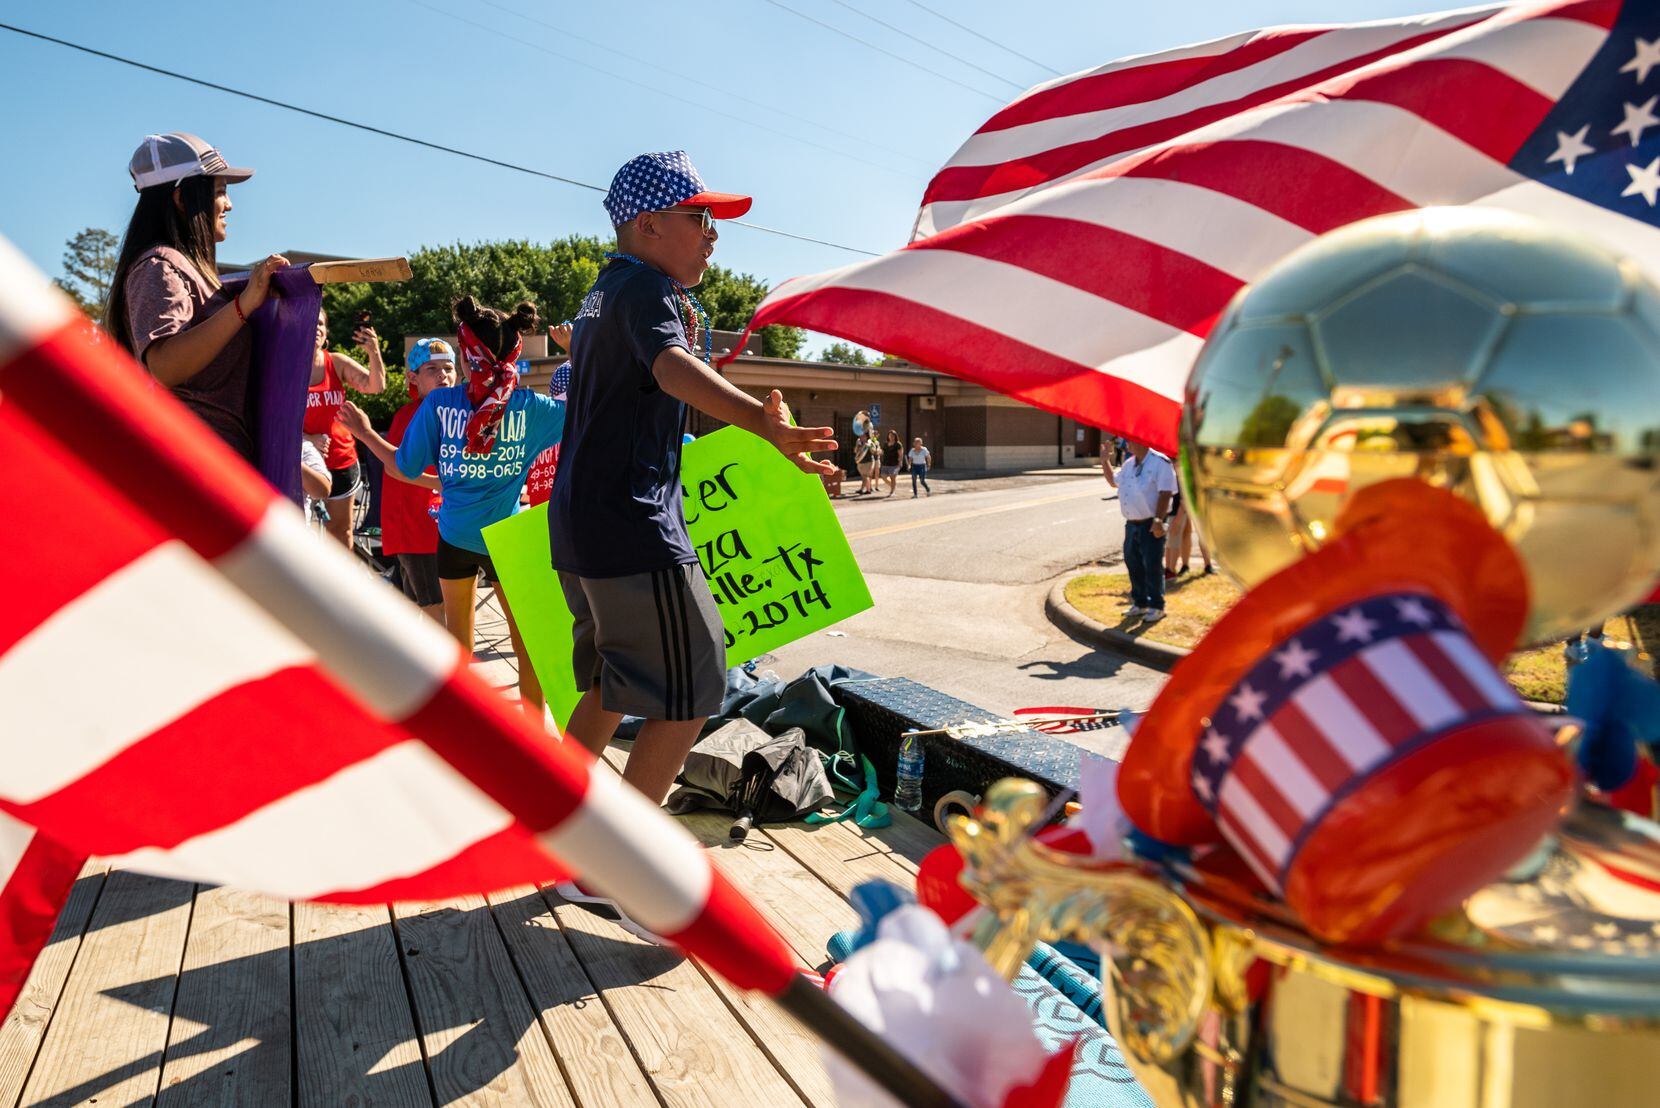 Luis Rivera Jr., 10, center, rides in the back of a trailer during this year's Independence...